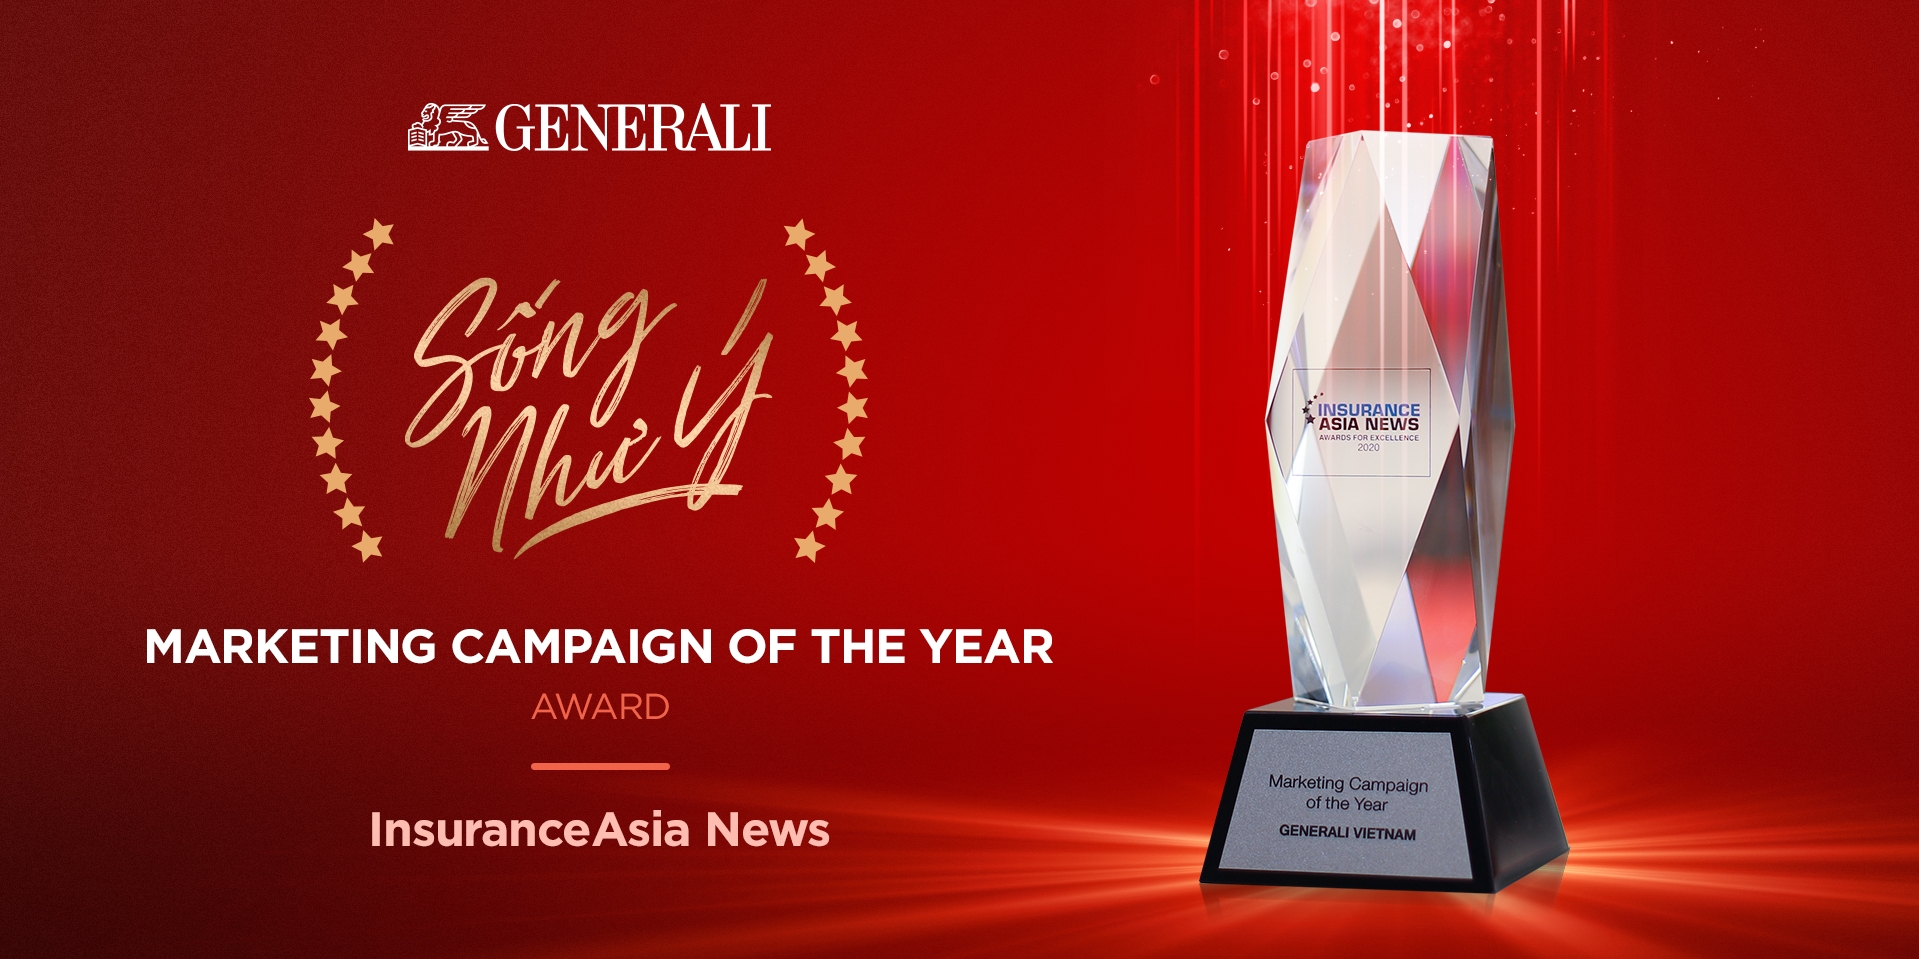 Generali Vietnam's “Song Nhu Y” awarded Marketing Campaign of the Year